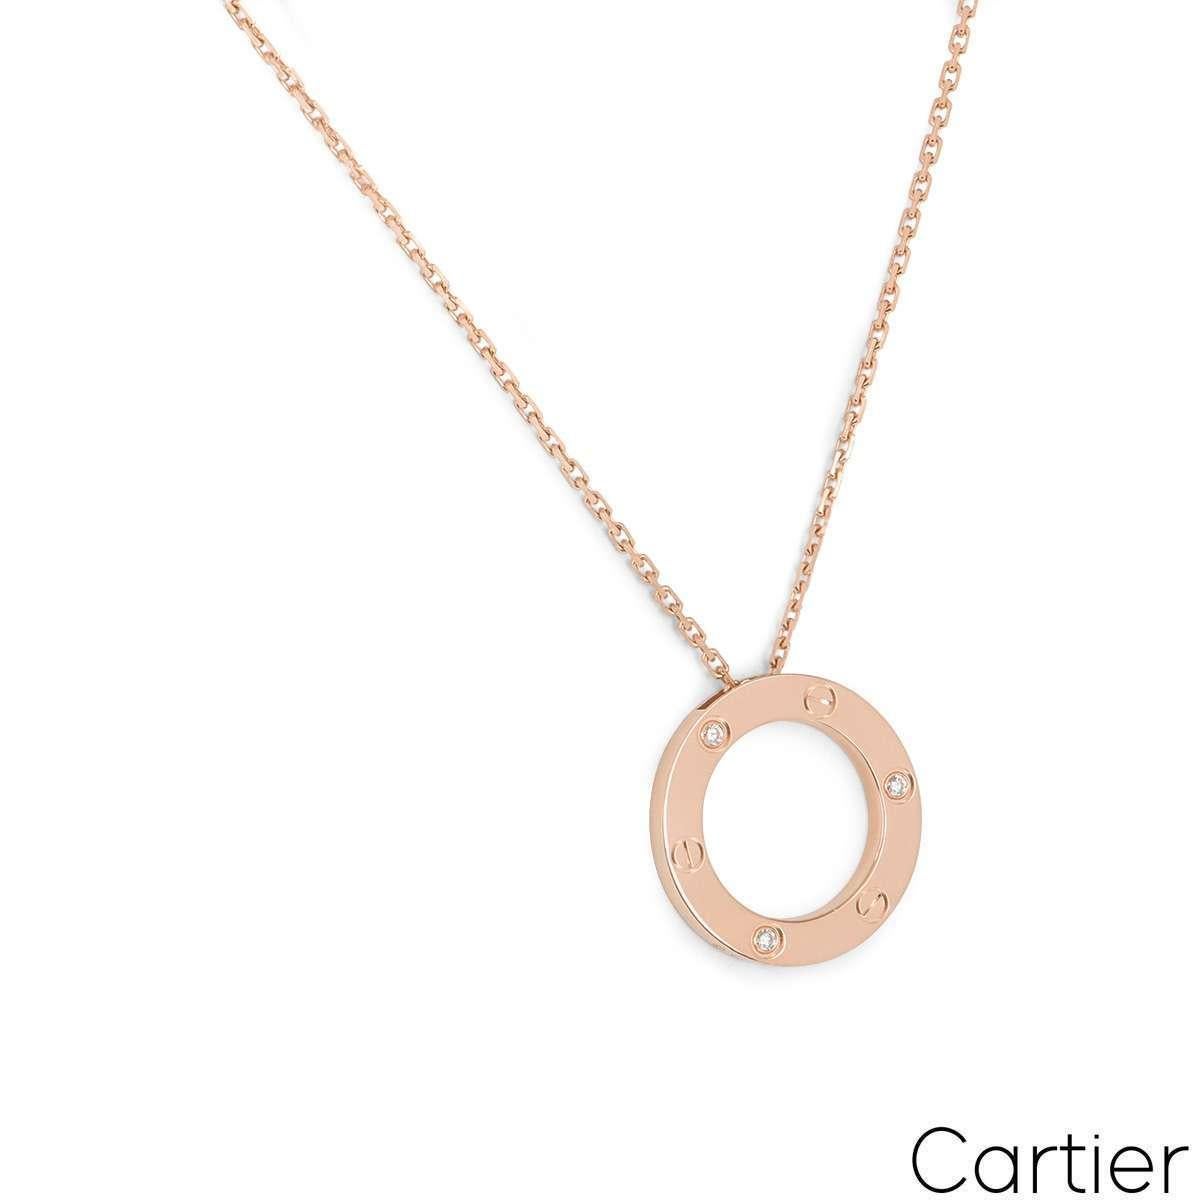 An 18k rose gold diamond pendant by Cartier from the Love collection. The pendant is comprises of an open circular motif, set with 3 round brilliant cut diamonds totalling 0.07ct and alternating between the iconic screws. On the reverse of the